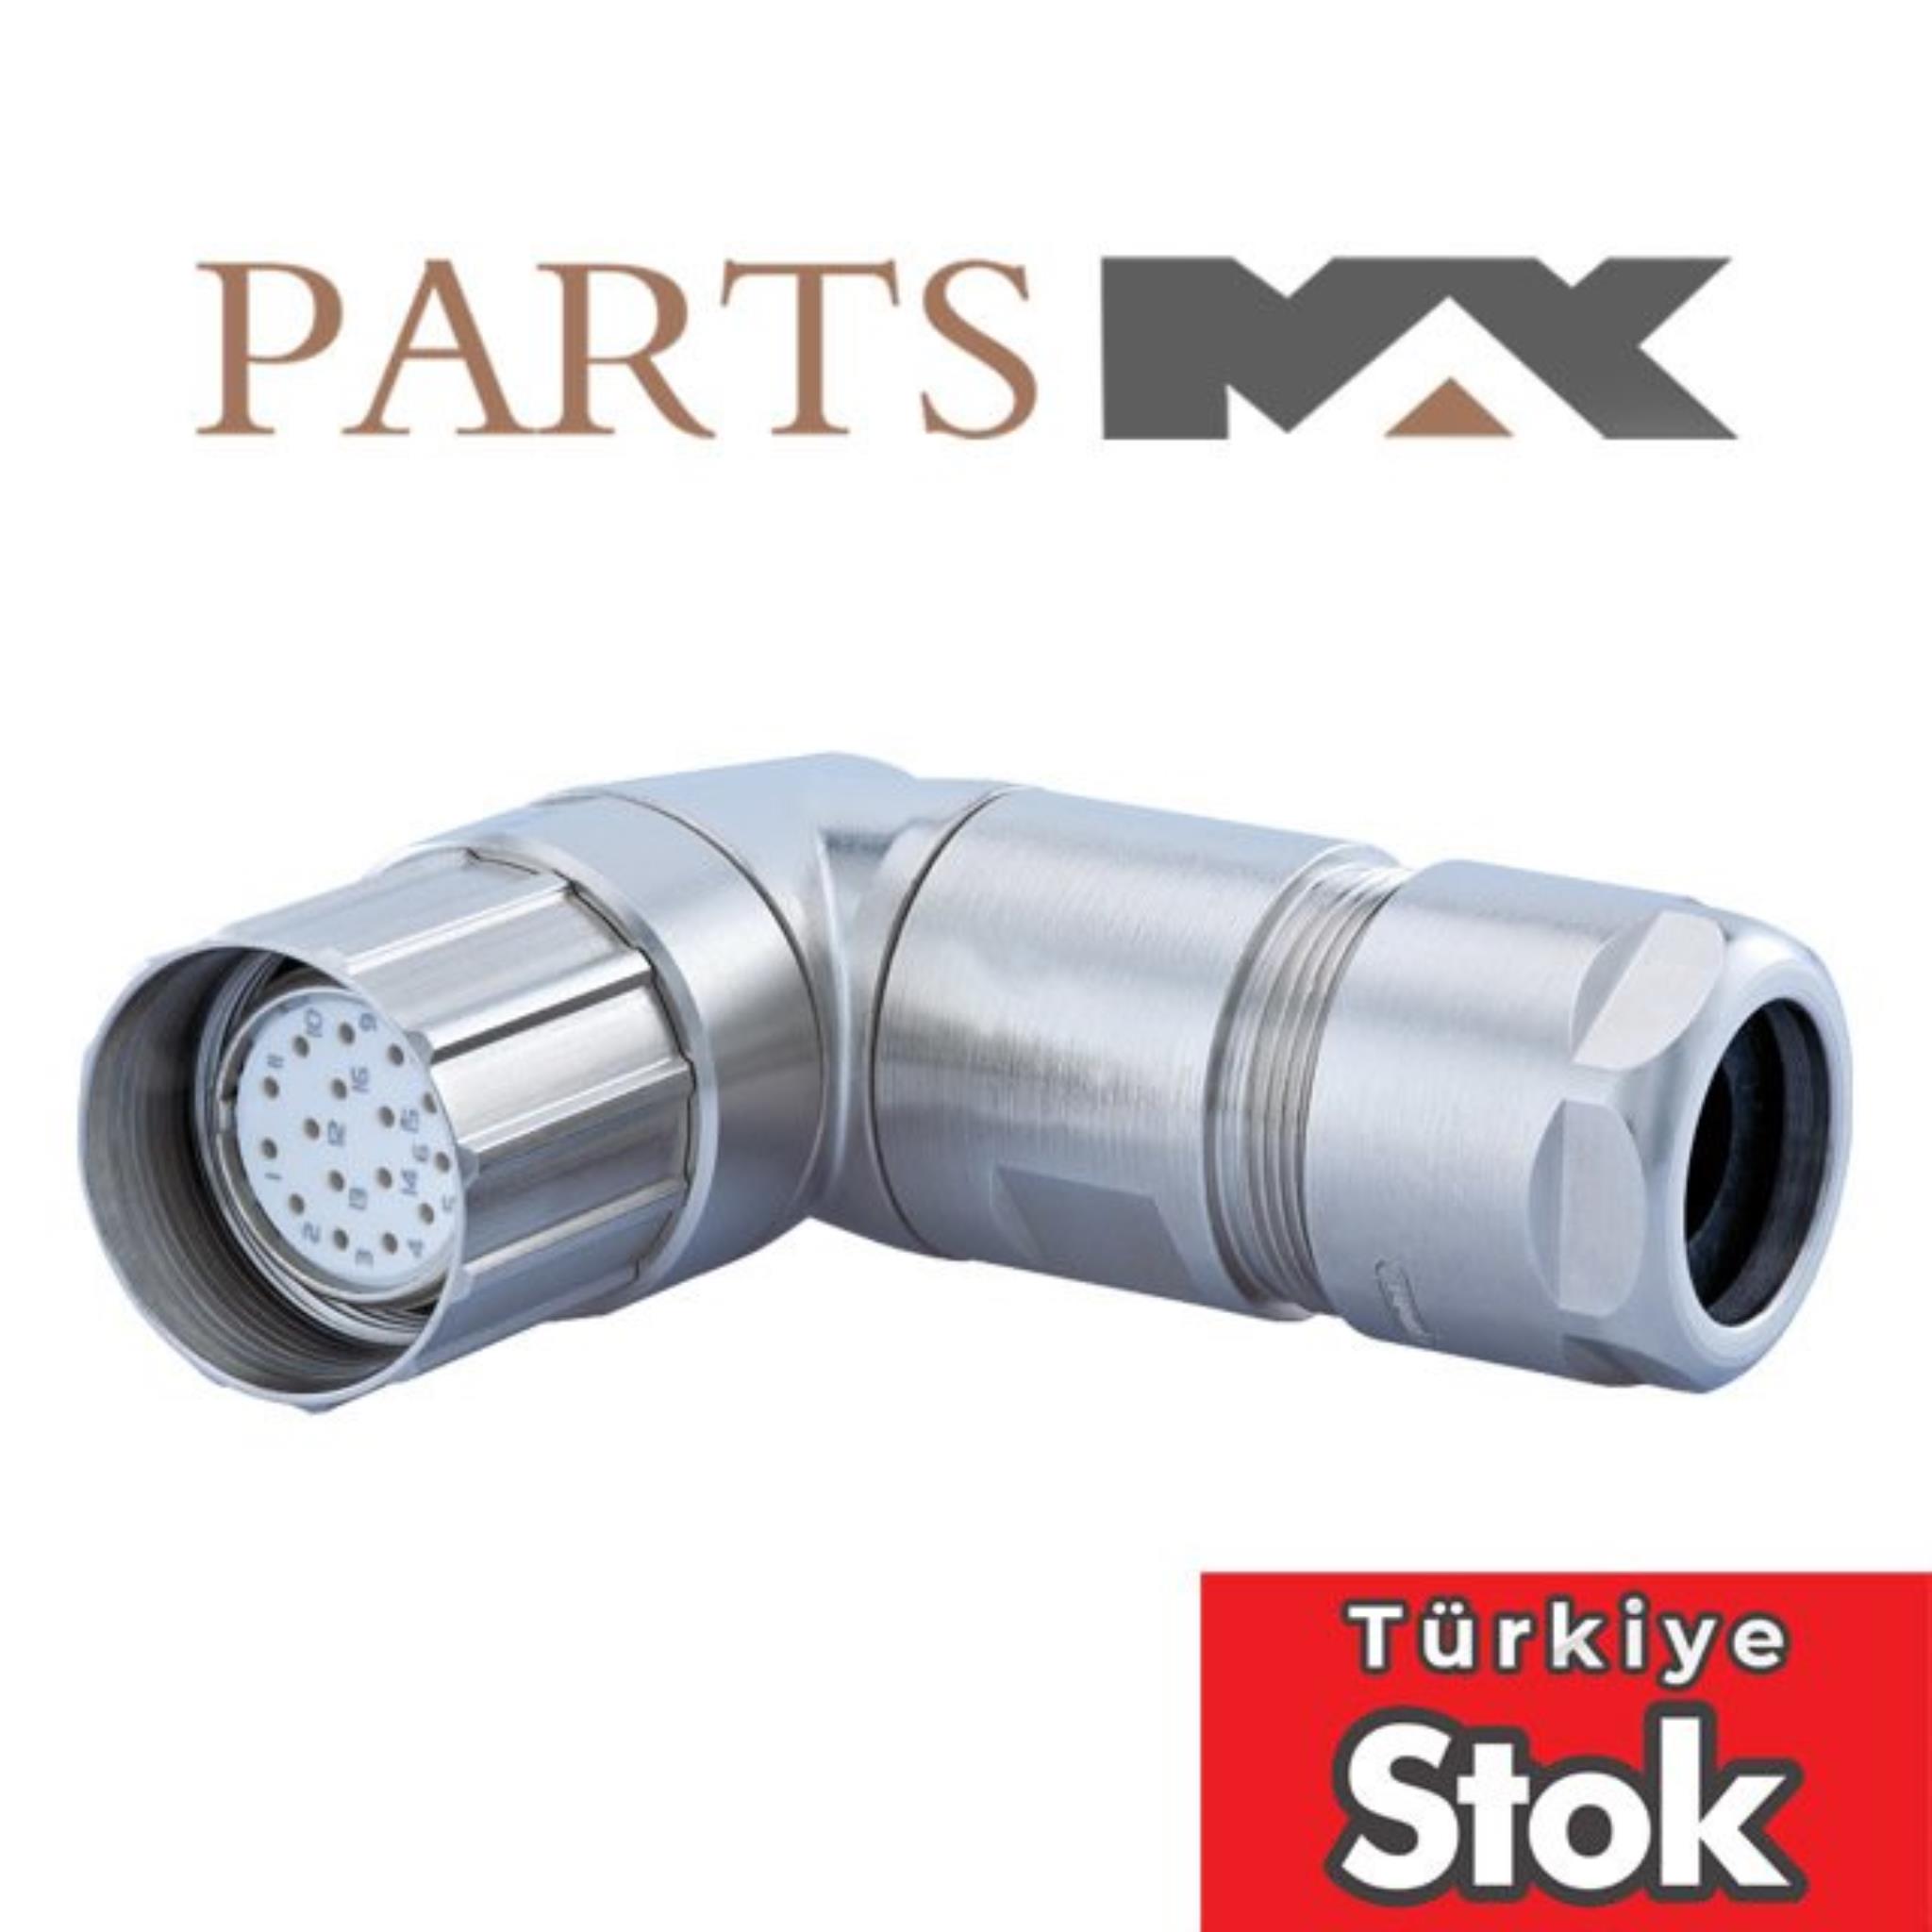 Picture of 7.300.300.000 M23 SIGNAL RIGHT ANGEL CONNECTOR | Partsmax Türkiye